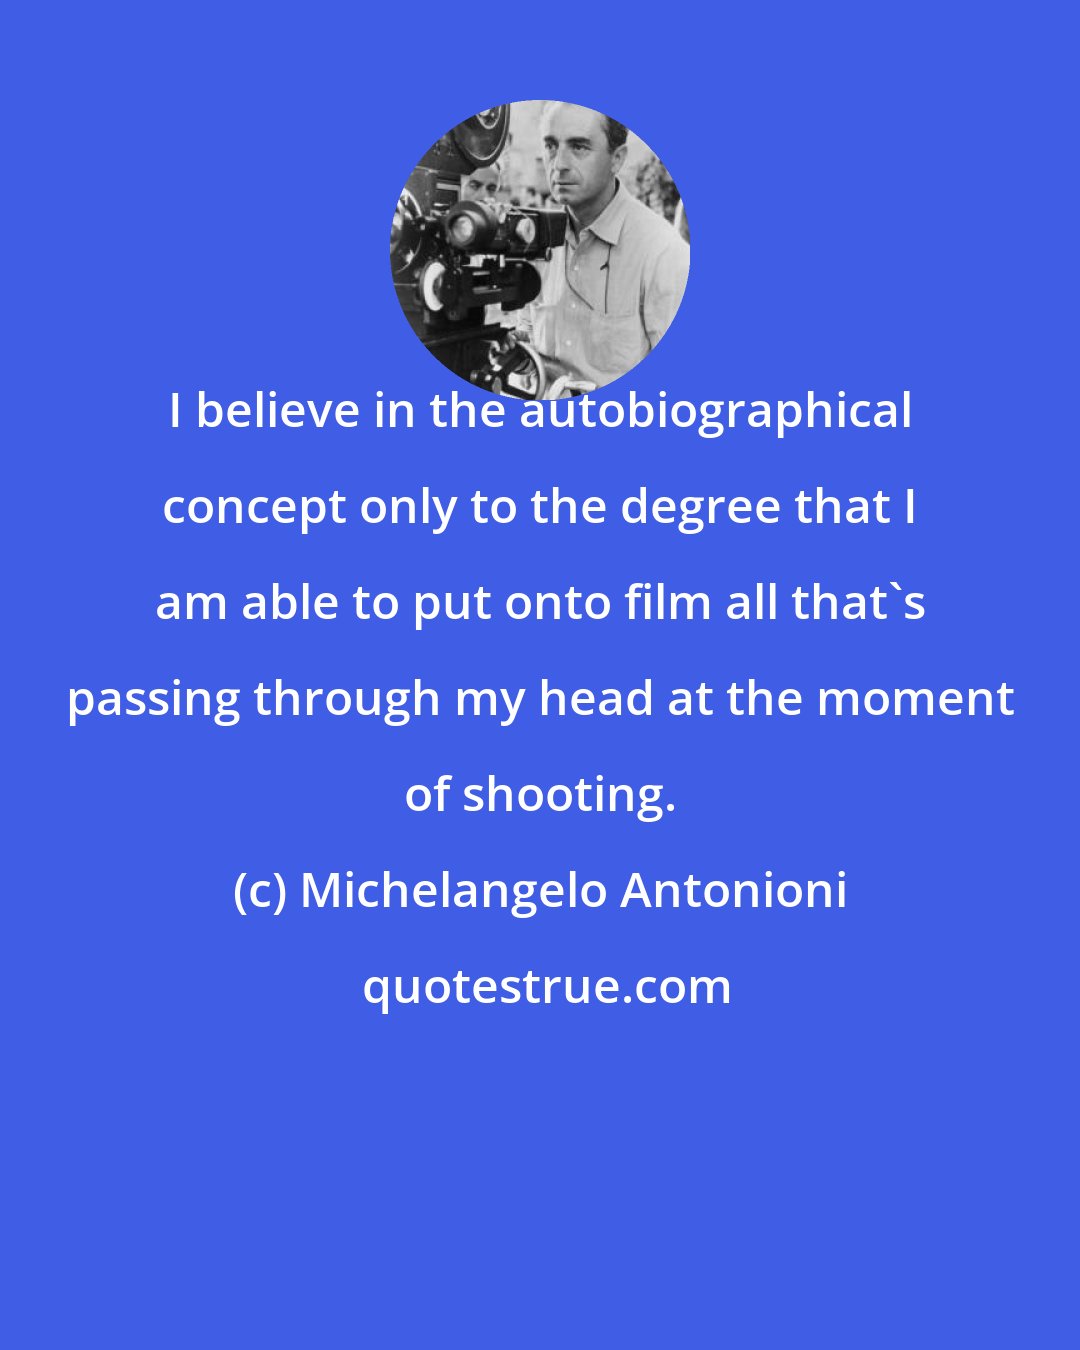 Michelangelo Antonioni: I believe in the autobiographical concept only to the degree that I am able to put onto film all that's passing through my head at the moment of shooting.